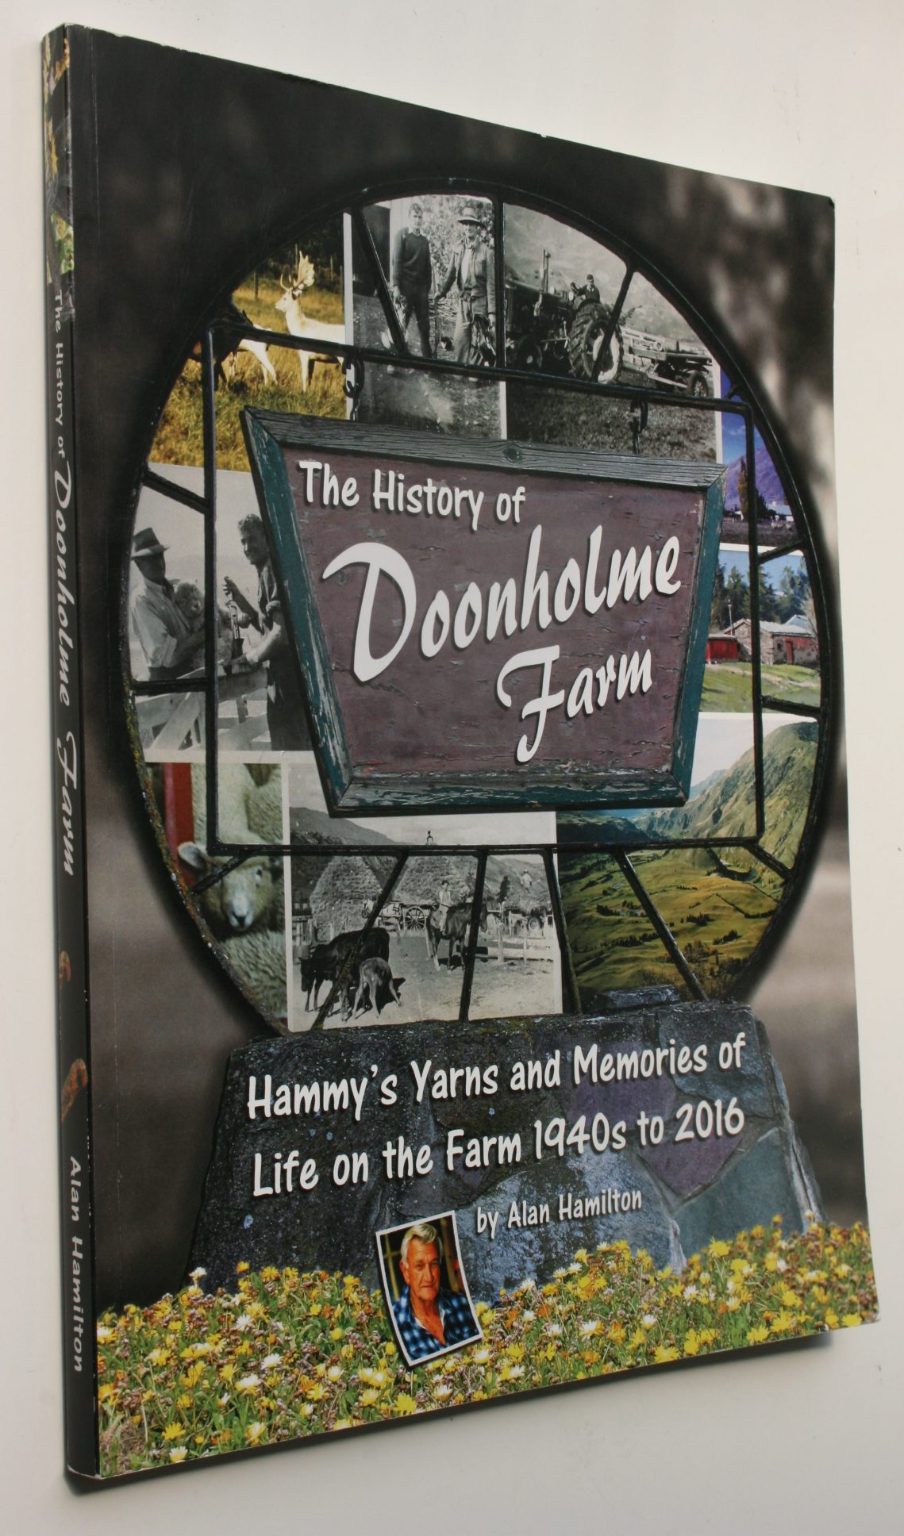 The History of Doonholme Farm: Hammy's Yarns and Memories of Life on the Farm, 1940s to 2016. SIGNED BY Author William Alan (Hammy) Hamilton.